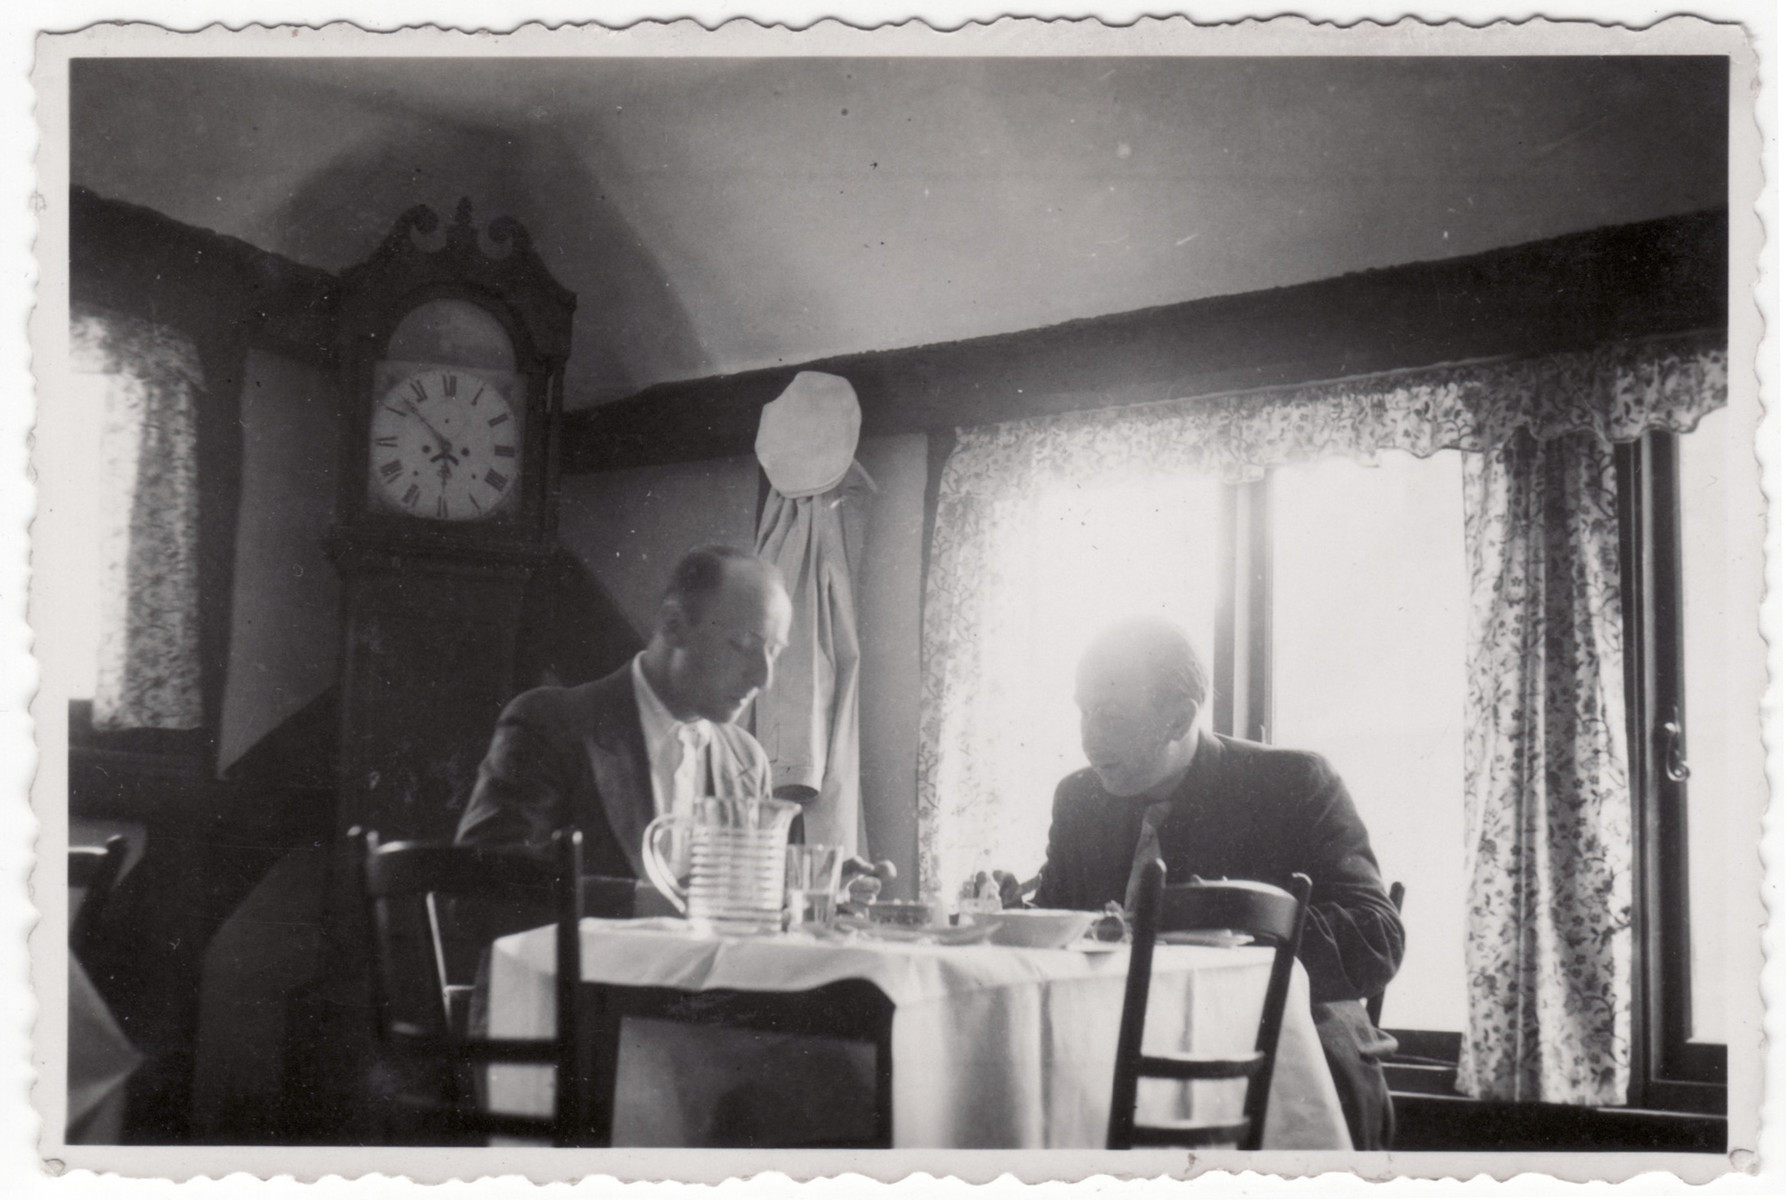 Siegfried Kulmann and a friend enjoy a meal while on a day trip to Ramsgate.